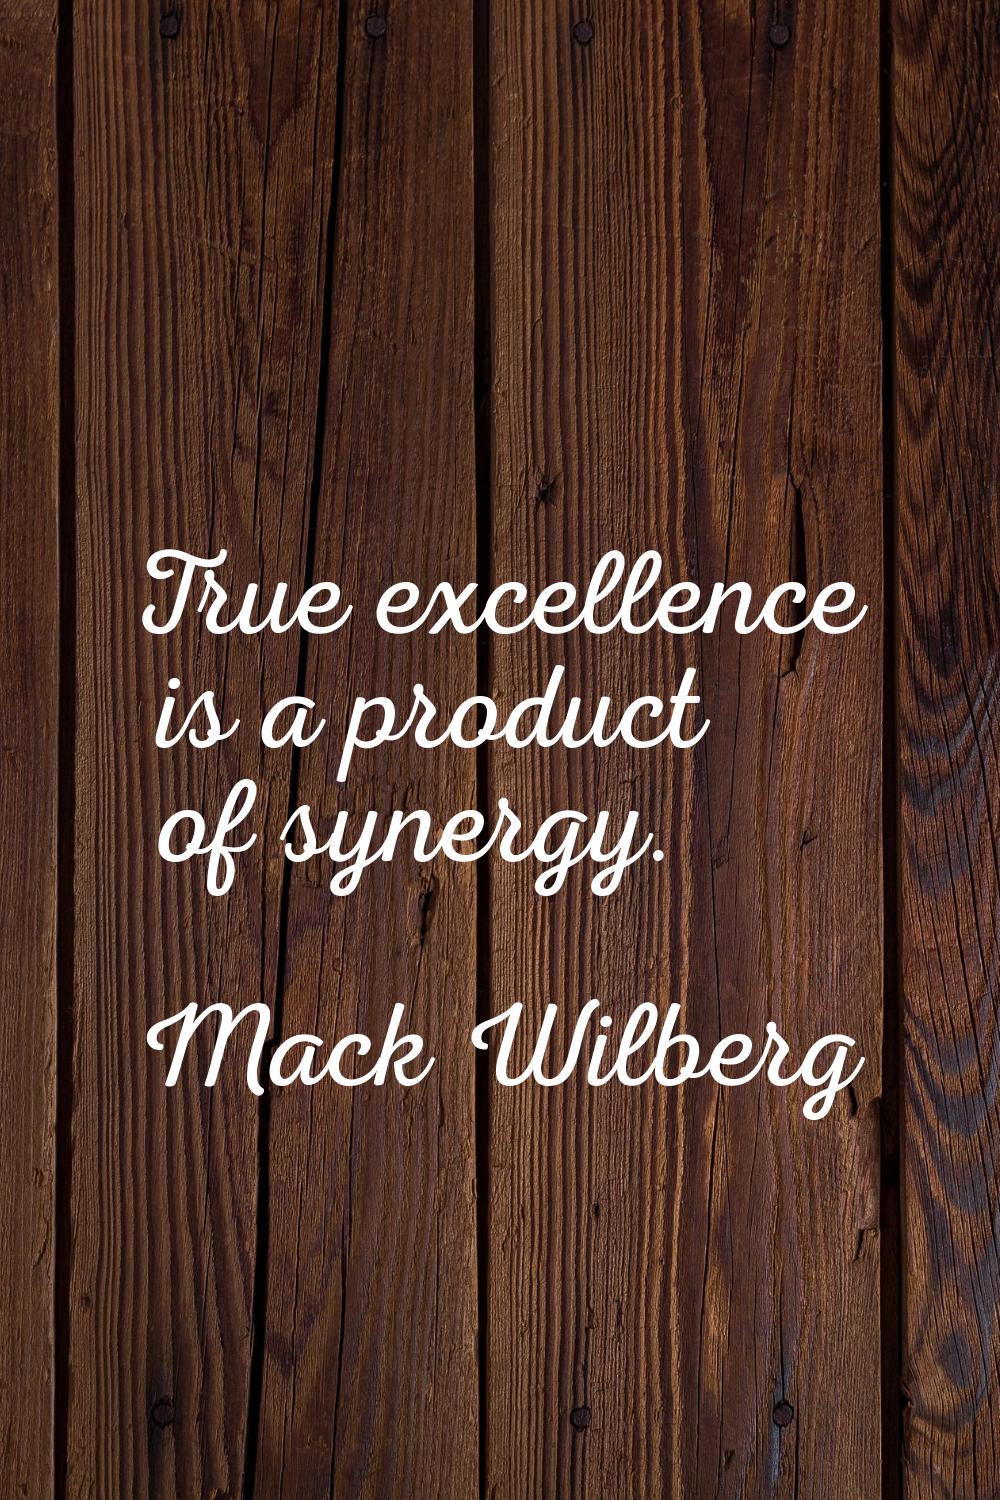 True excellence is a product of synergy.